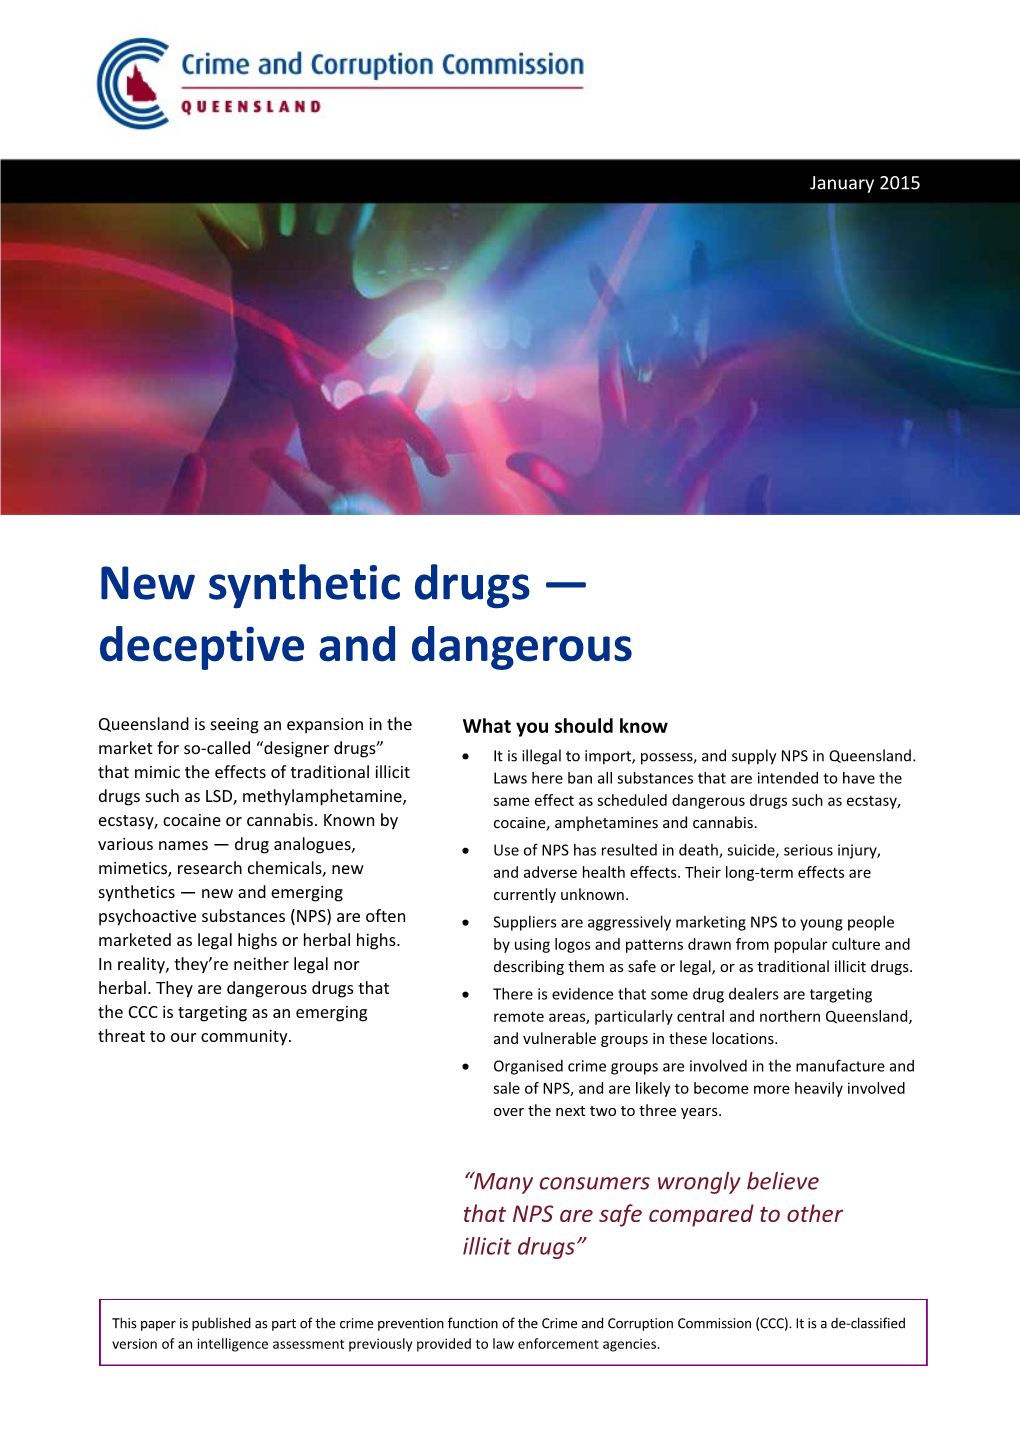 New Synthetic Drugs Deceptive and Dangerous